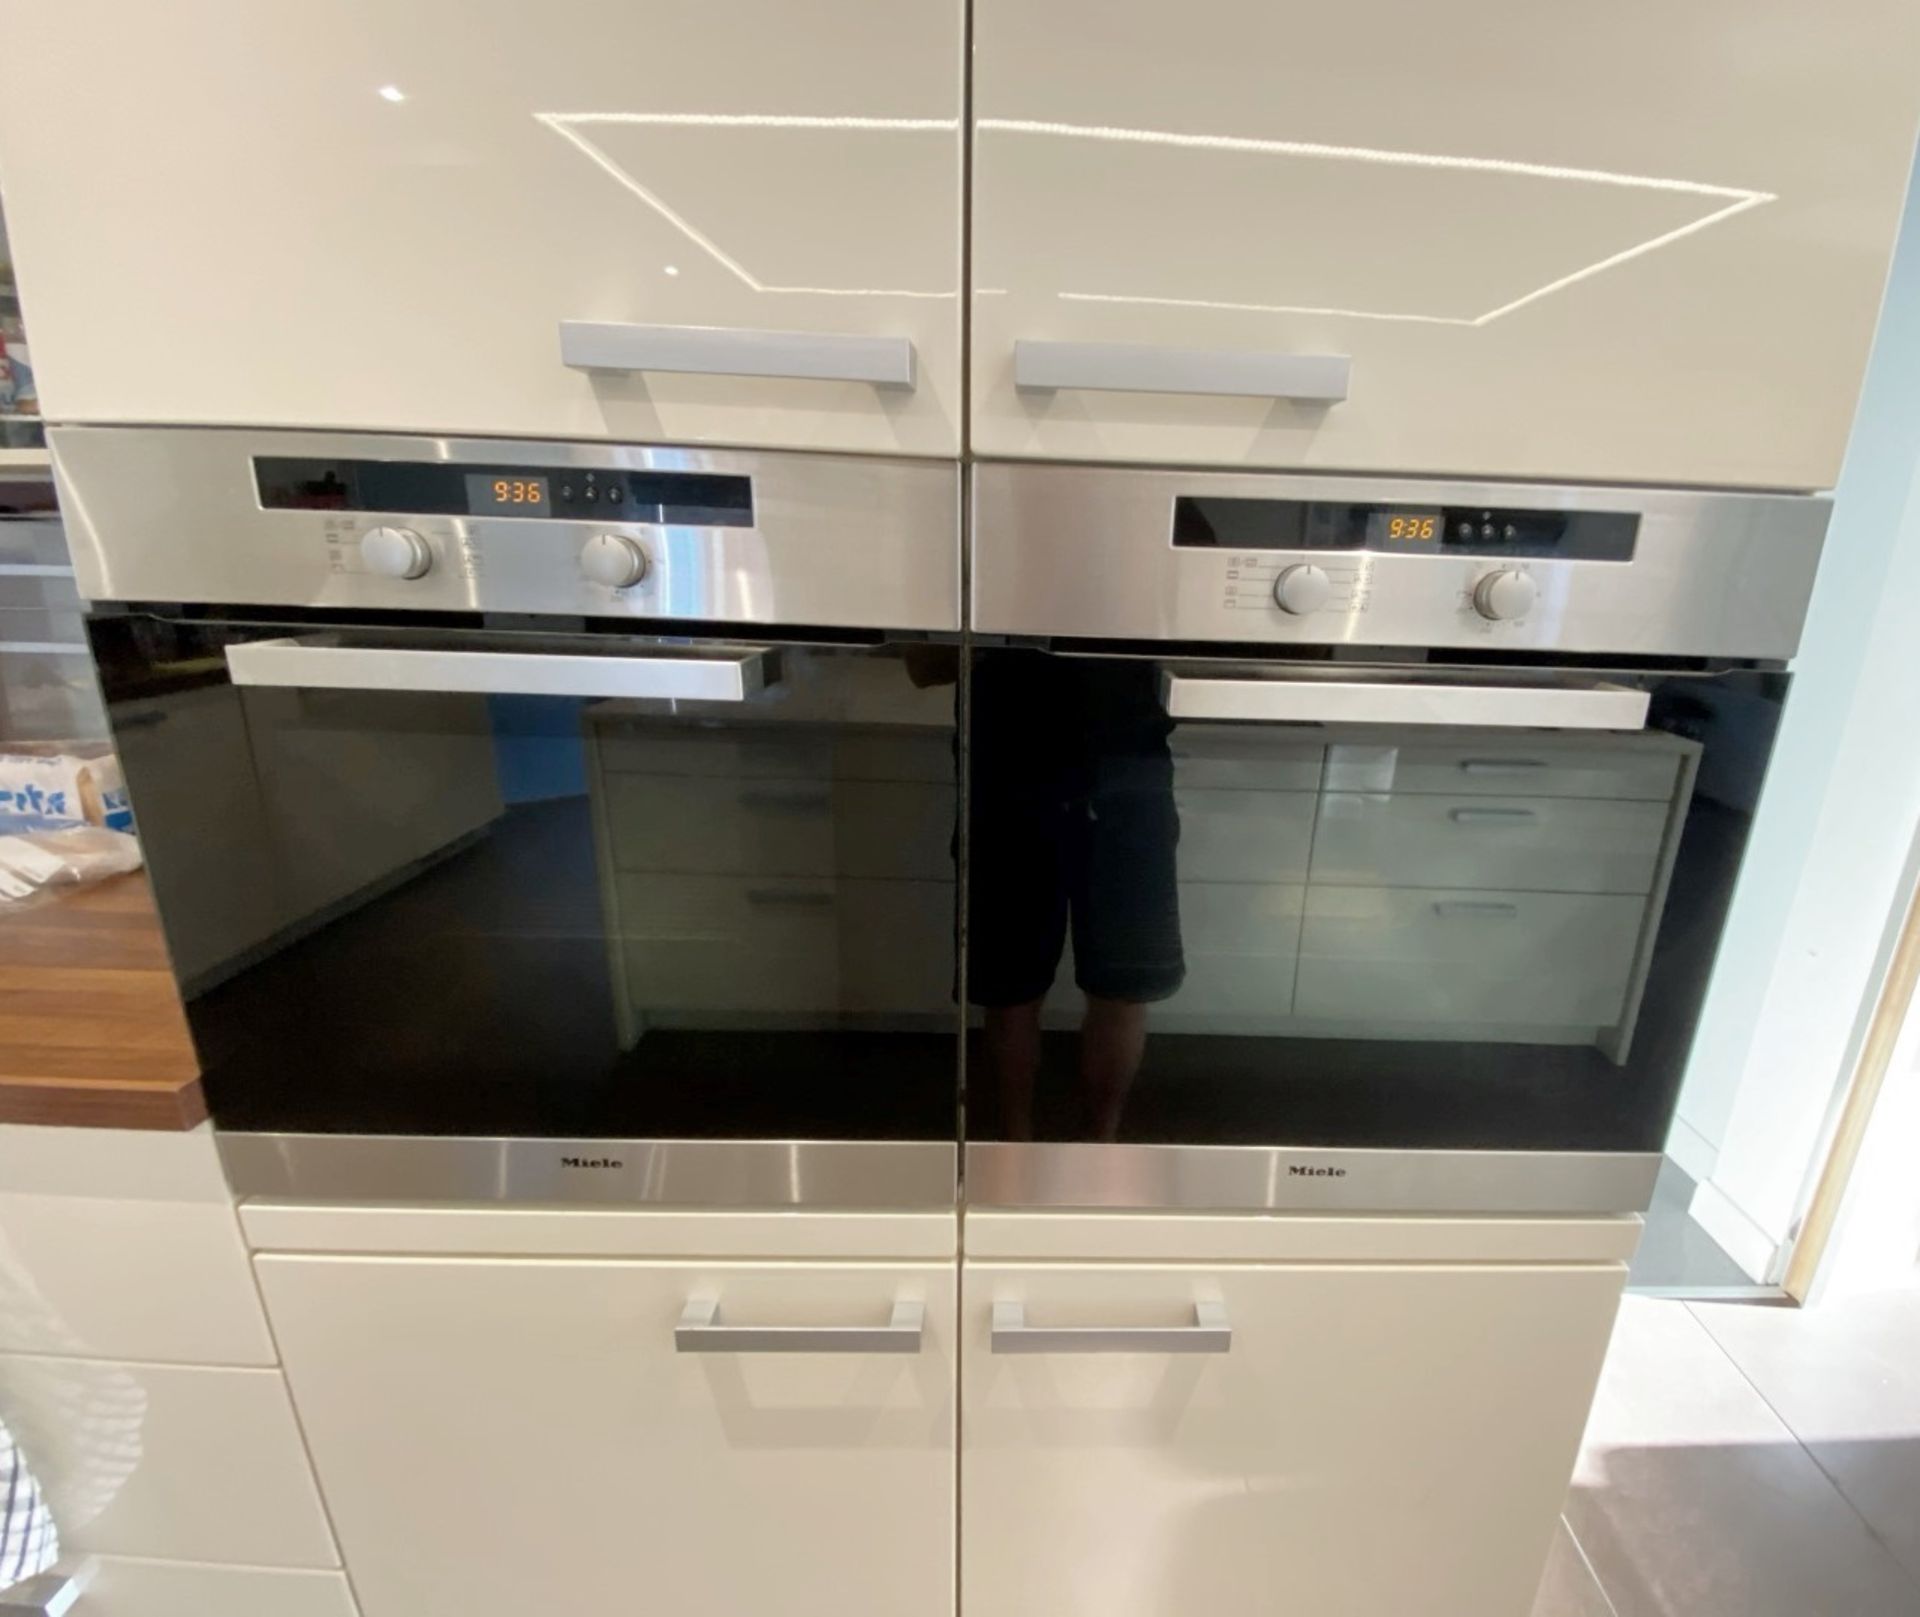 1 x Bespoke Luxury ALNO Branded Fitted Kitchen With Miele Appliances And Silestone® Central Island - Image 6 of 10